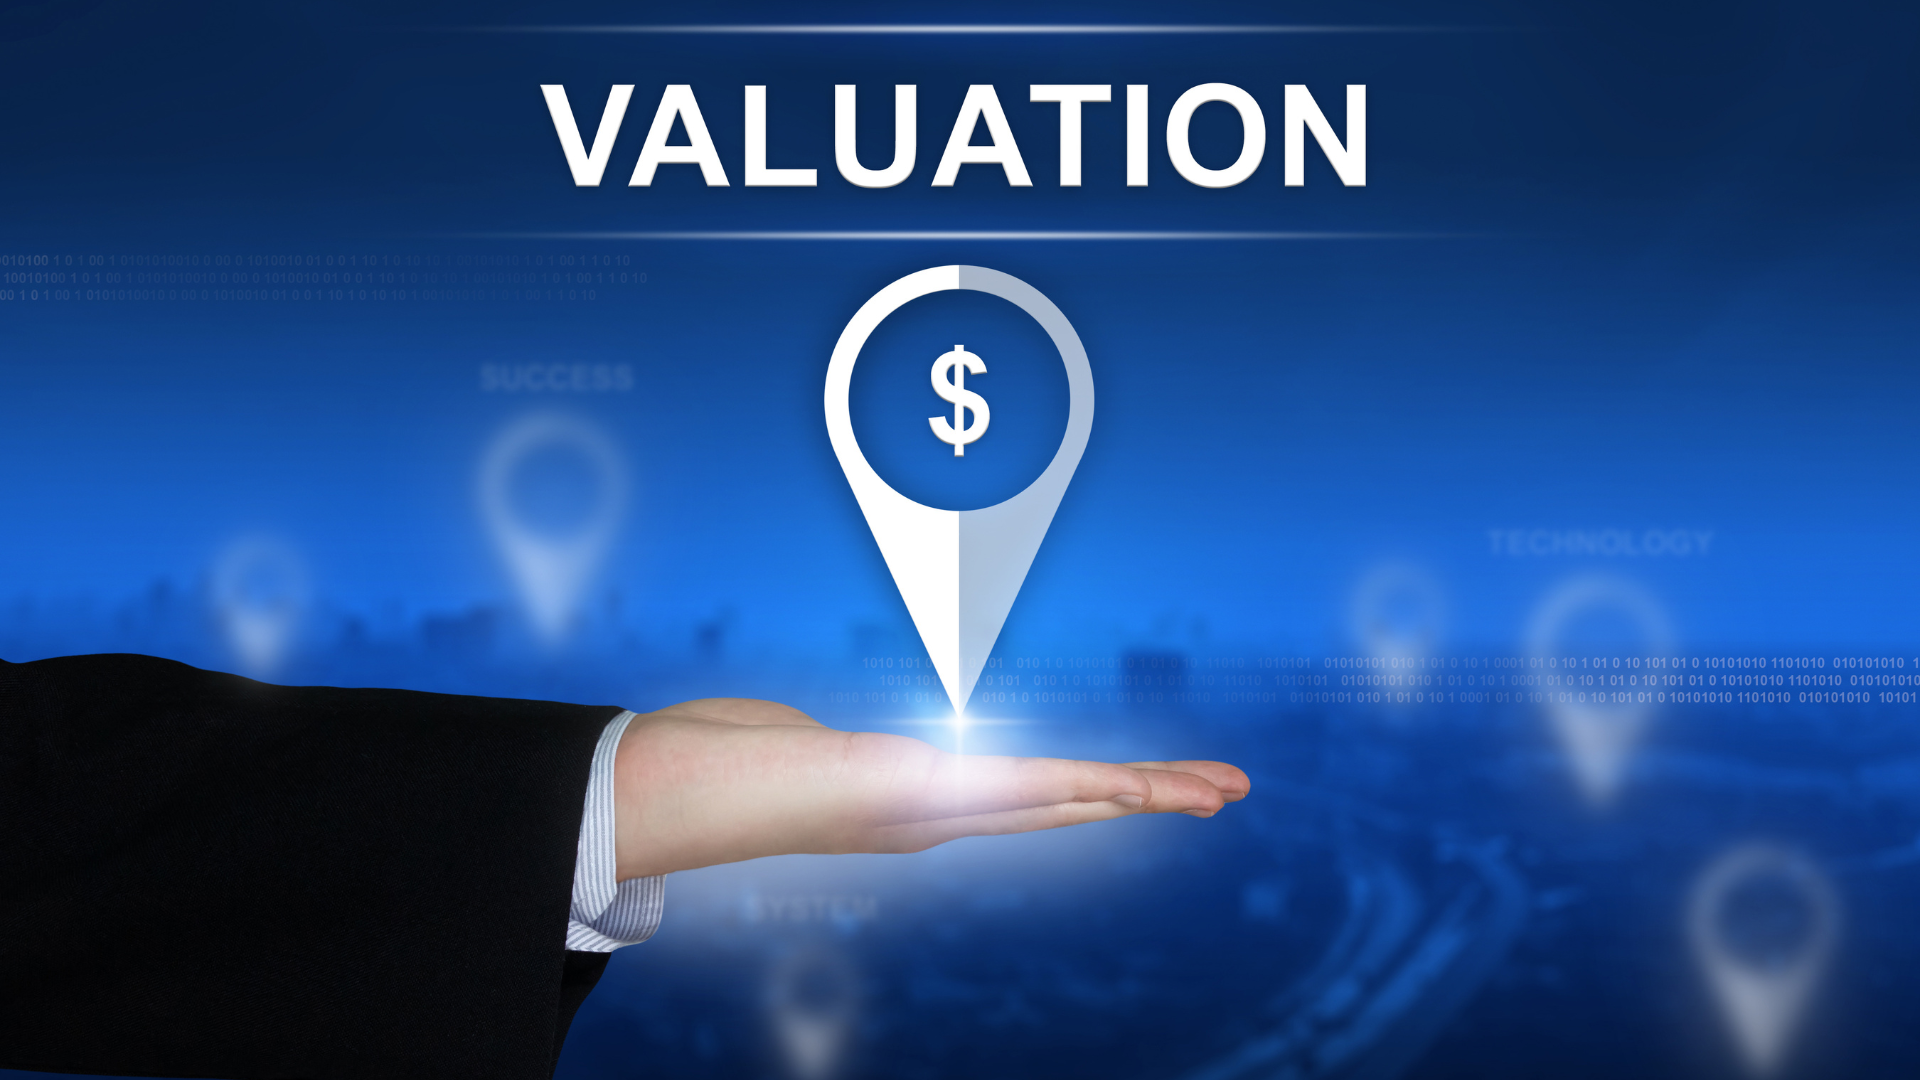 a hand is holding a dollar sign in front of the word valuation .